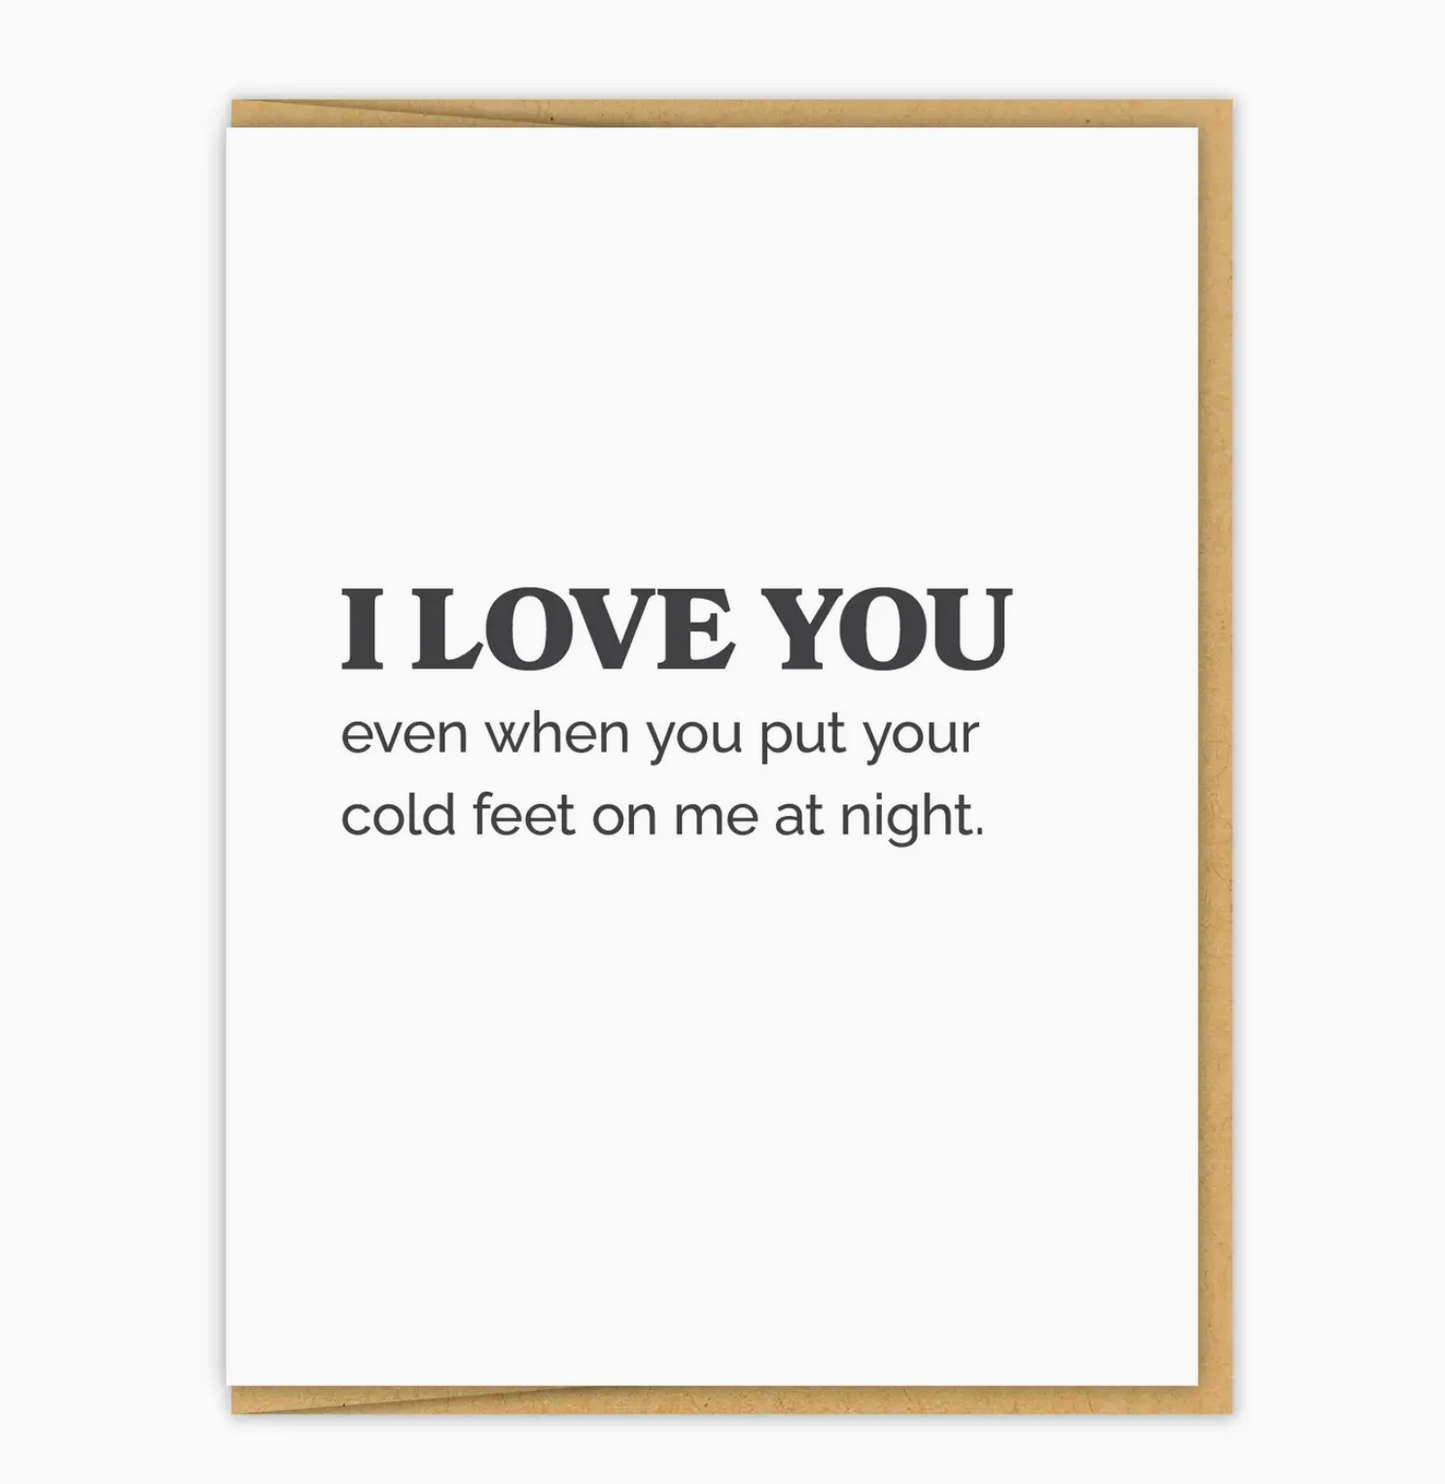 I Love You Even When You Put Your Cold Feet On Me At Night Card